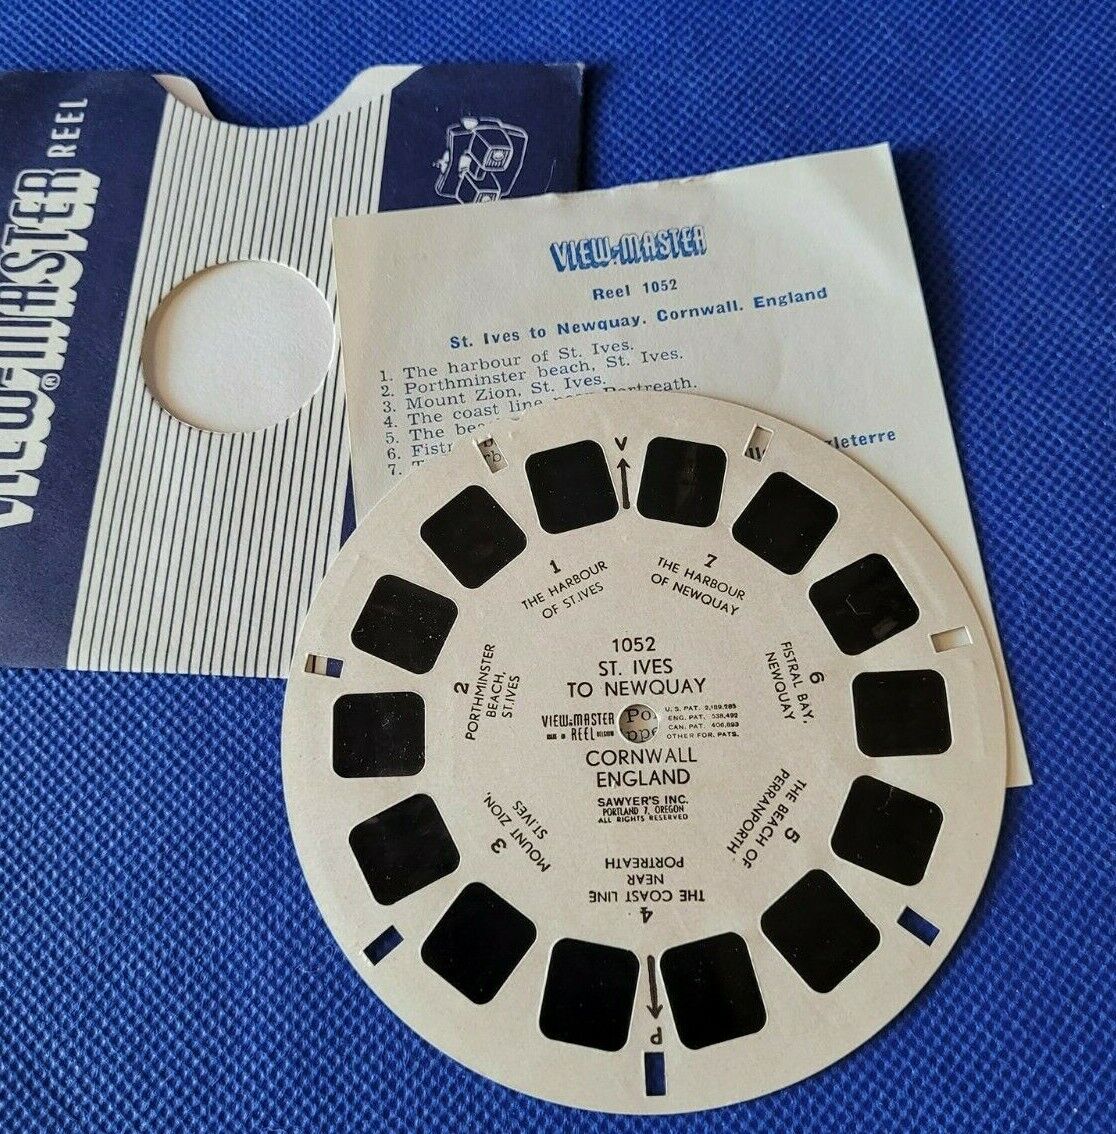 Sawyer's Single view-master Reel 1052 St. Ives to Newquay Cornwall England